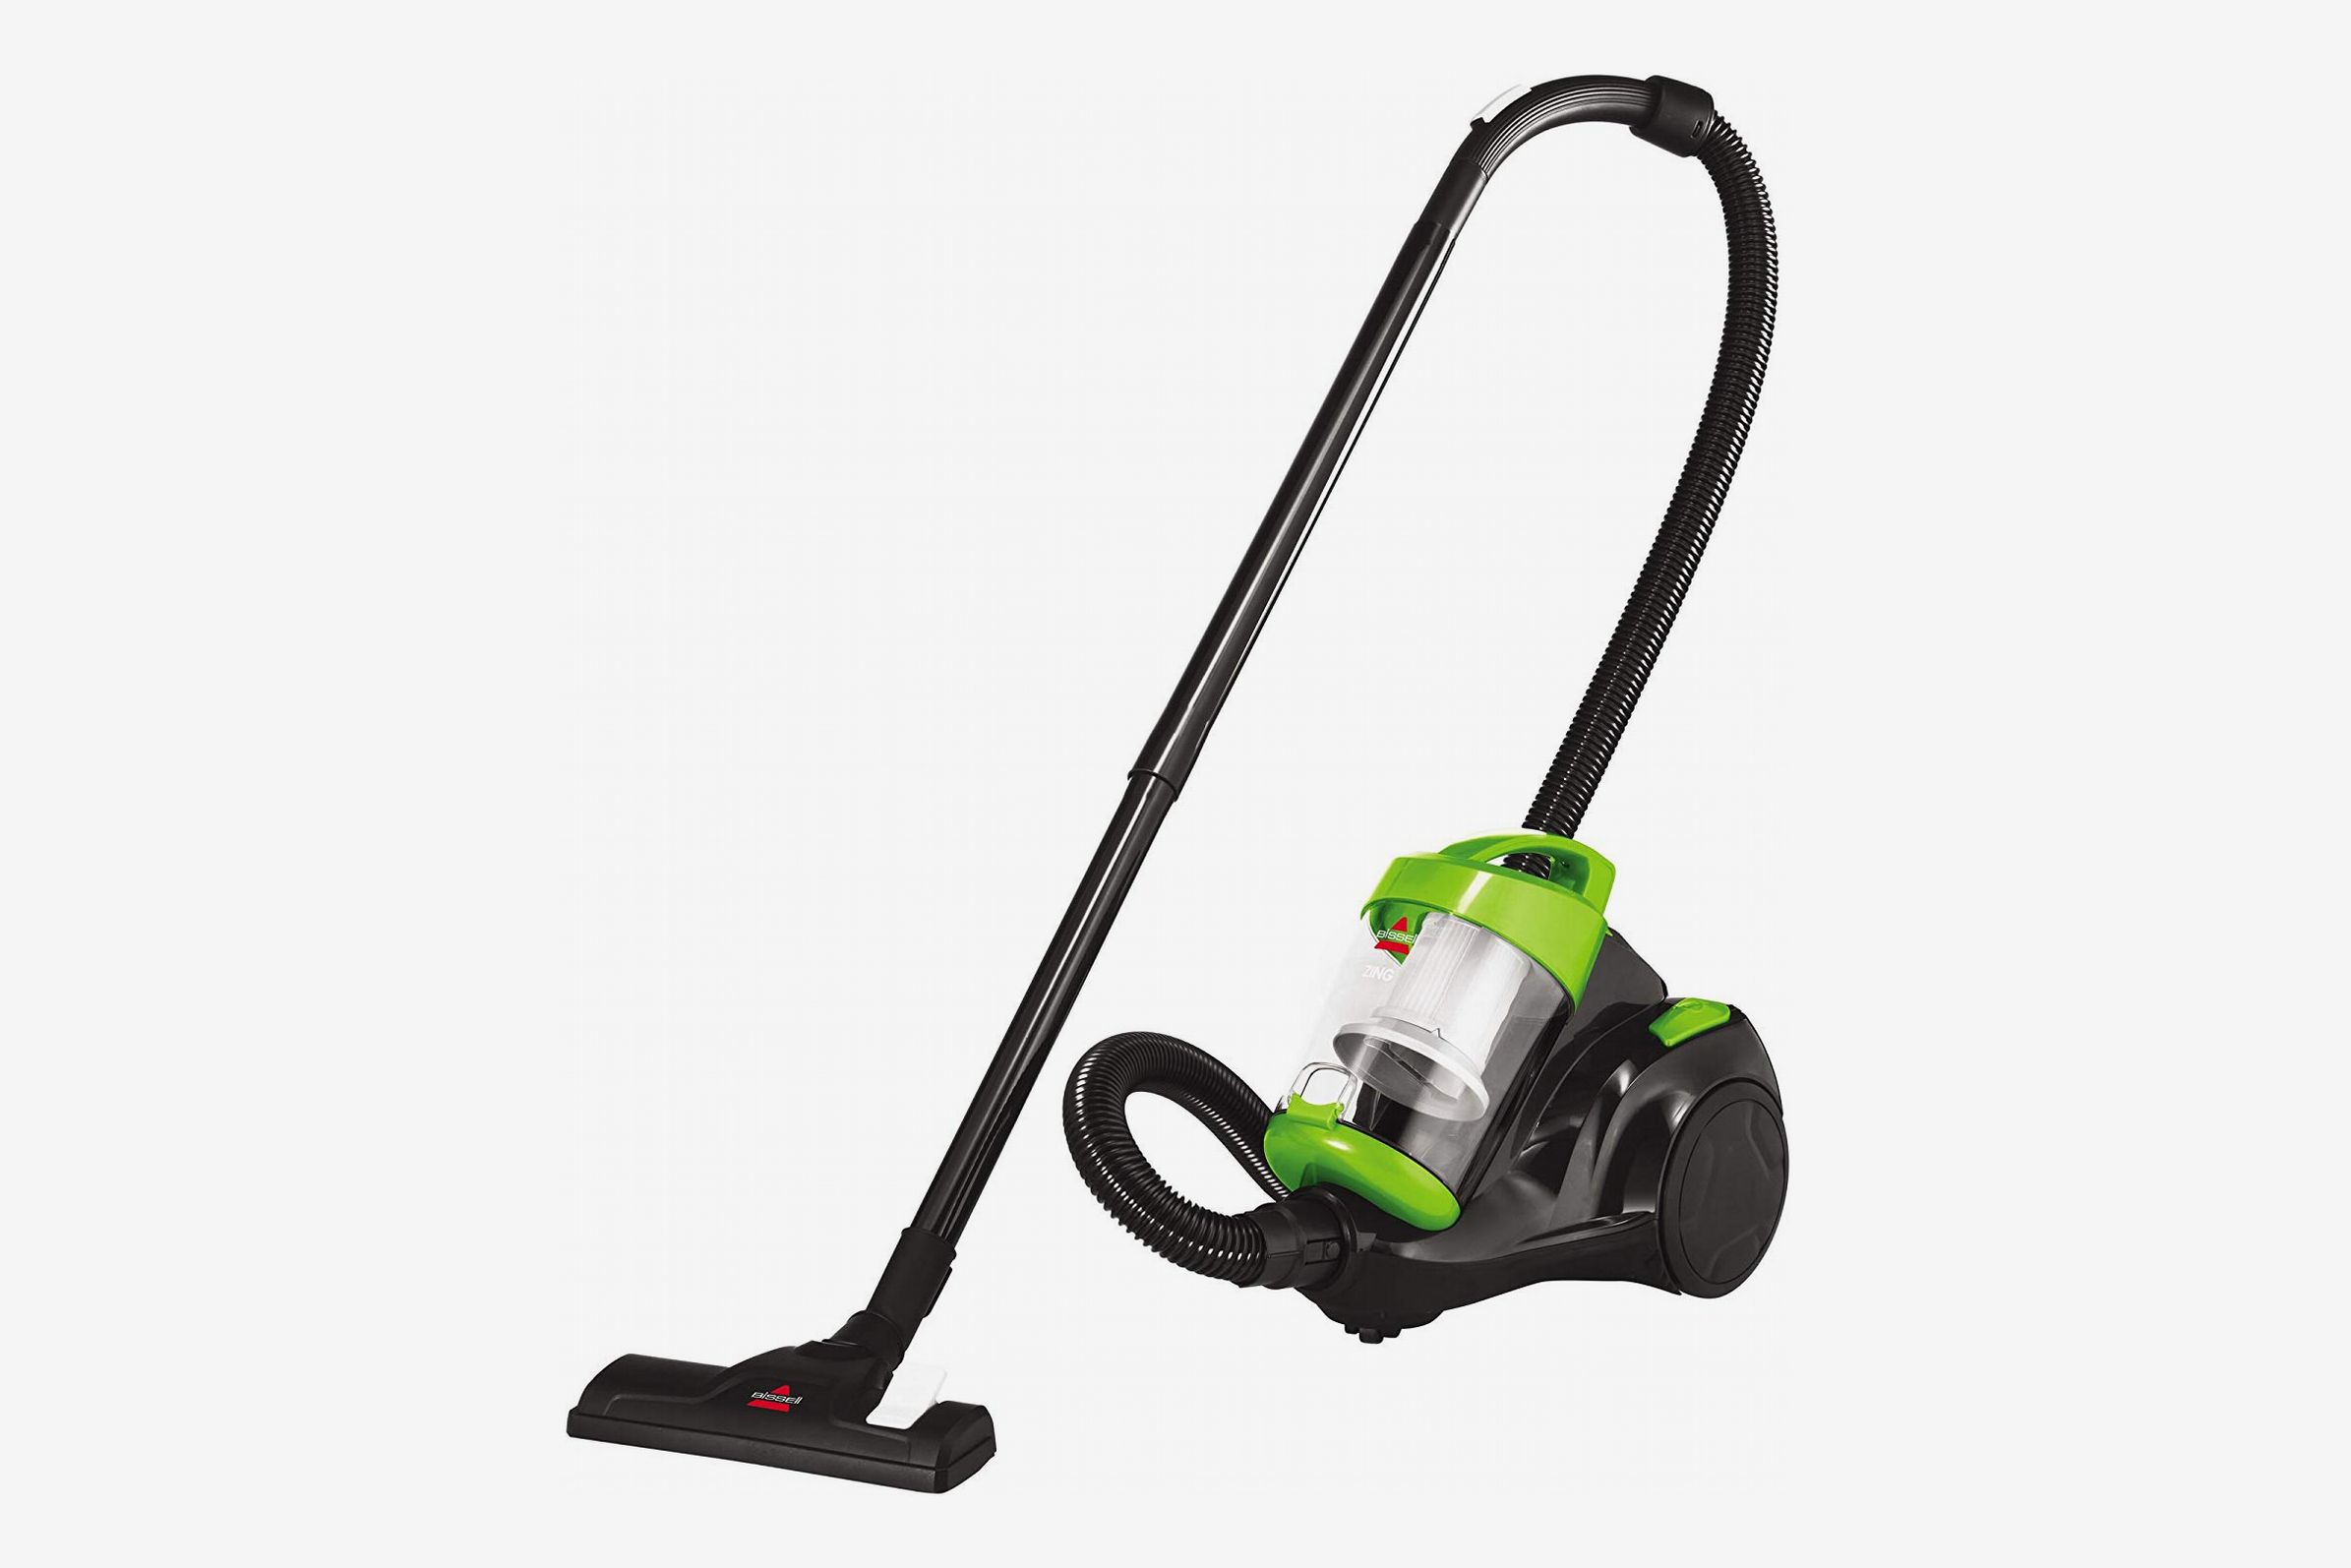 18 Best Vacuum Cleaners 2021 The, Best Rated Vacuum Cleaners For Carpet And Hardwood Floors